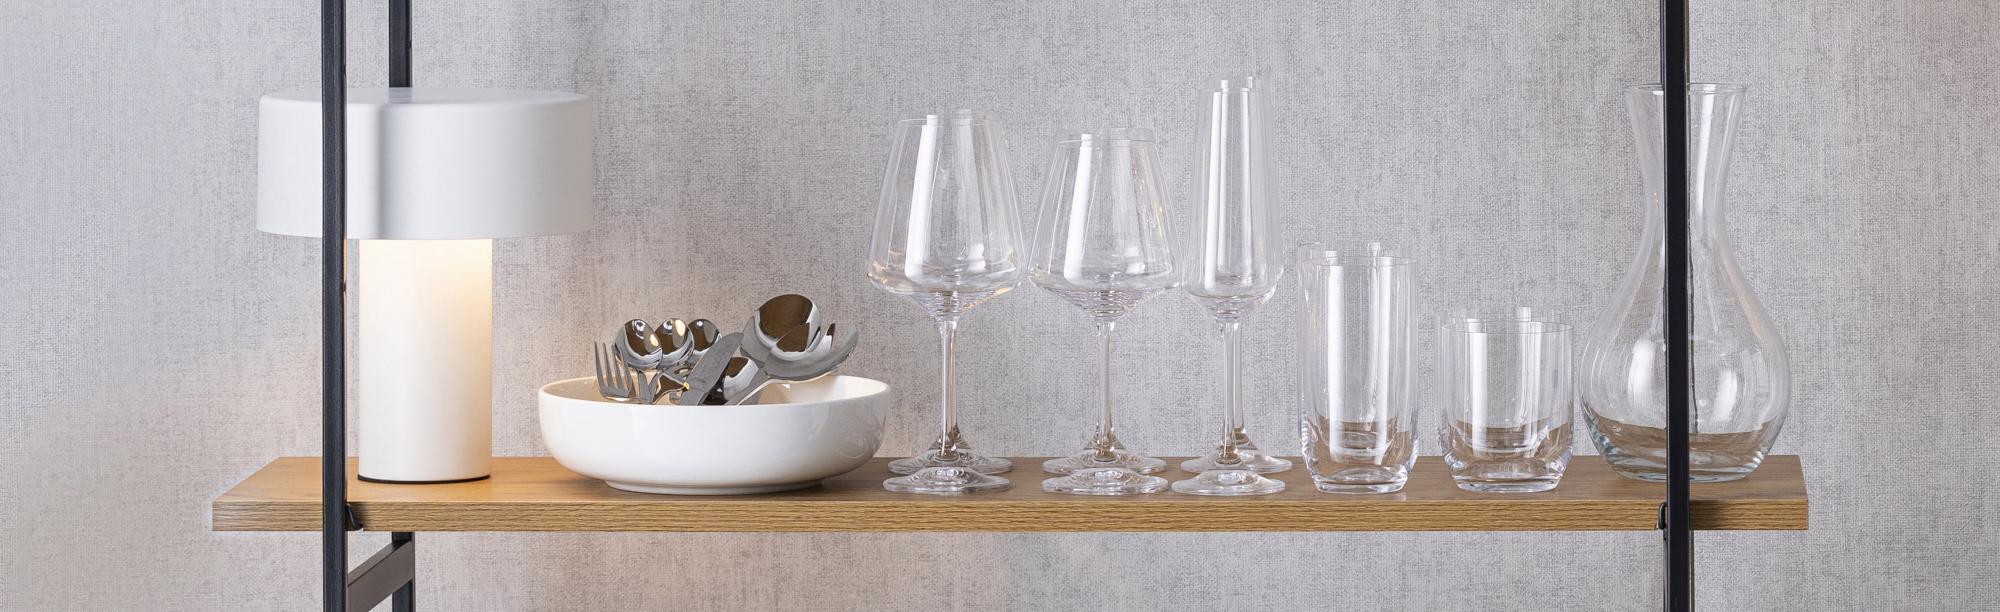 About MOODS tableware glassware collection